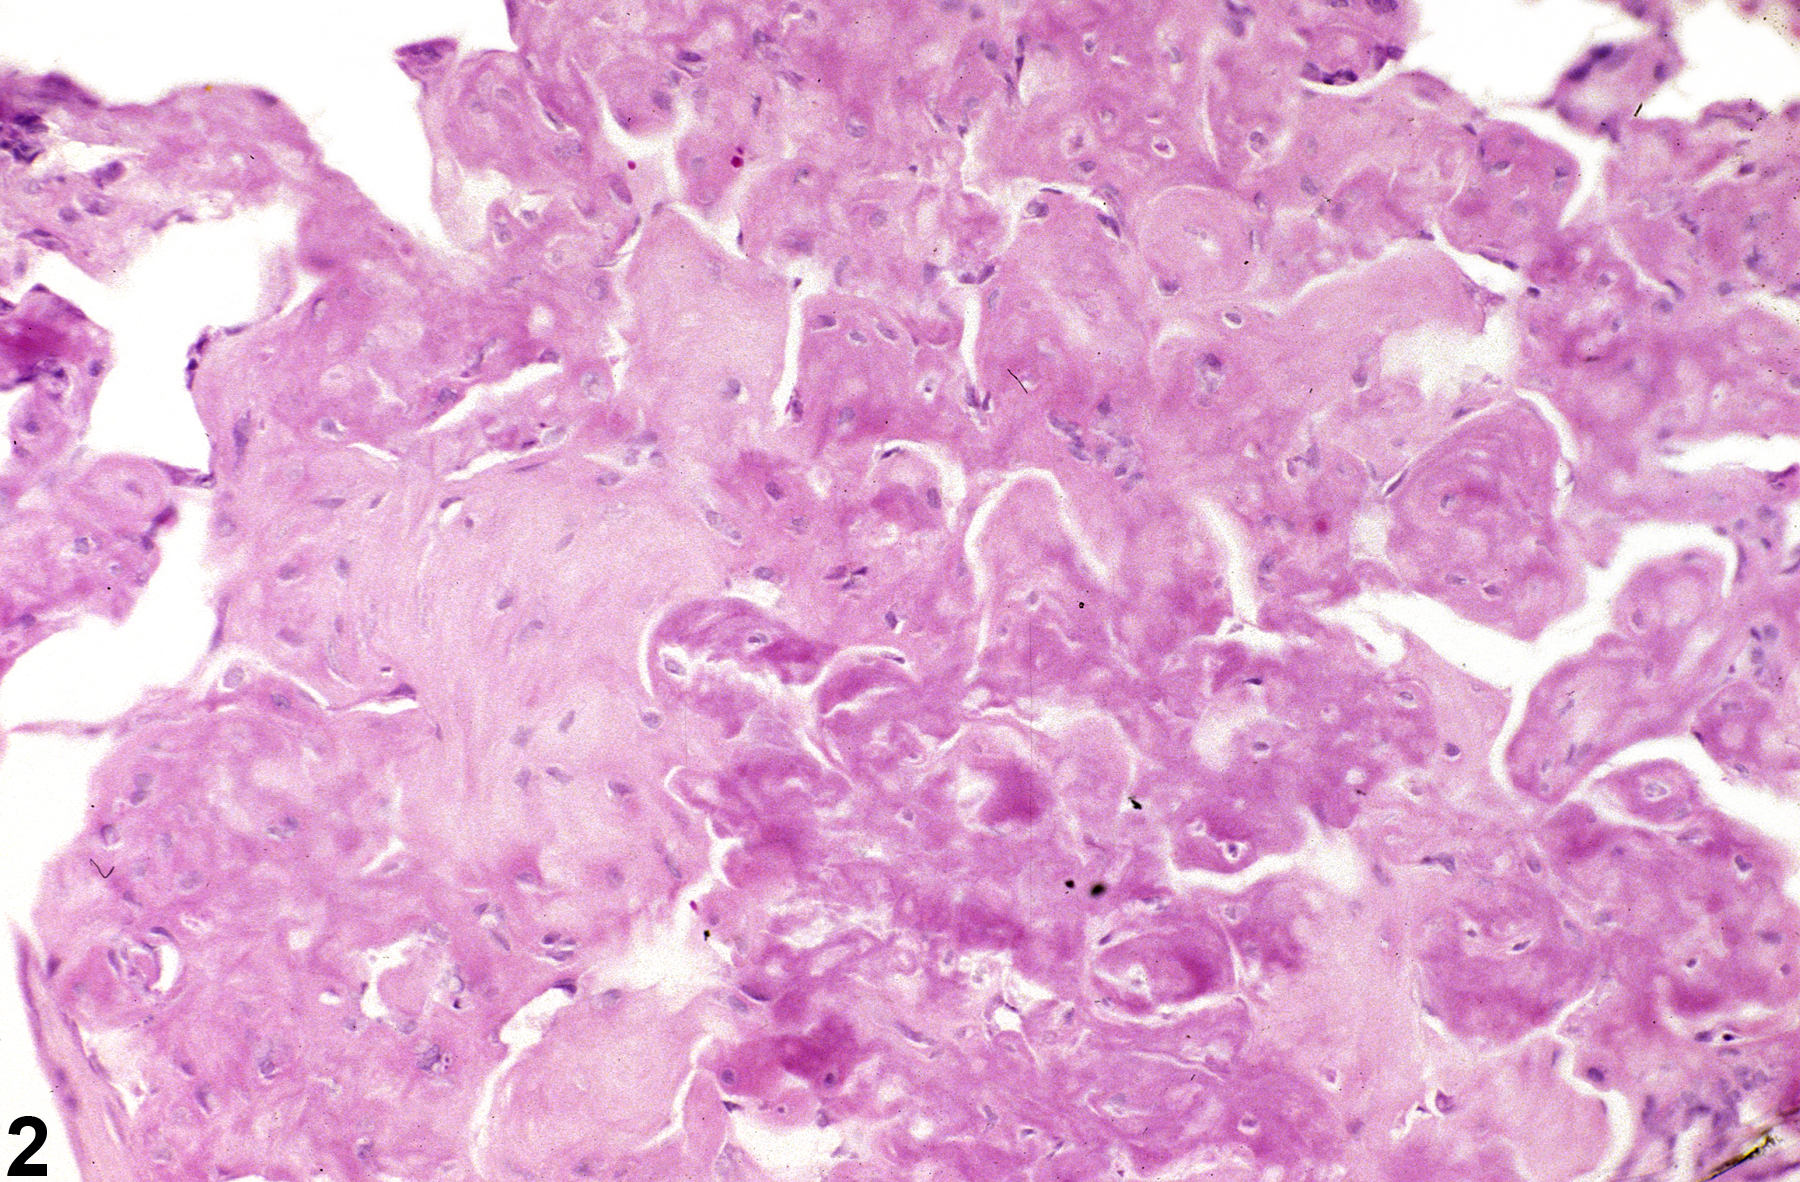 Image of osseous metaplasia in the lung from an  F344/N rat in a chronic study